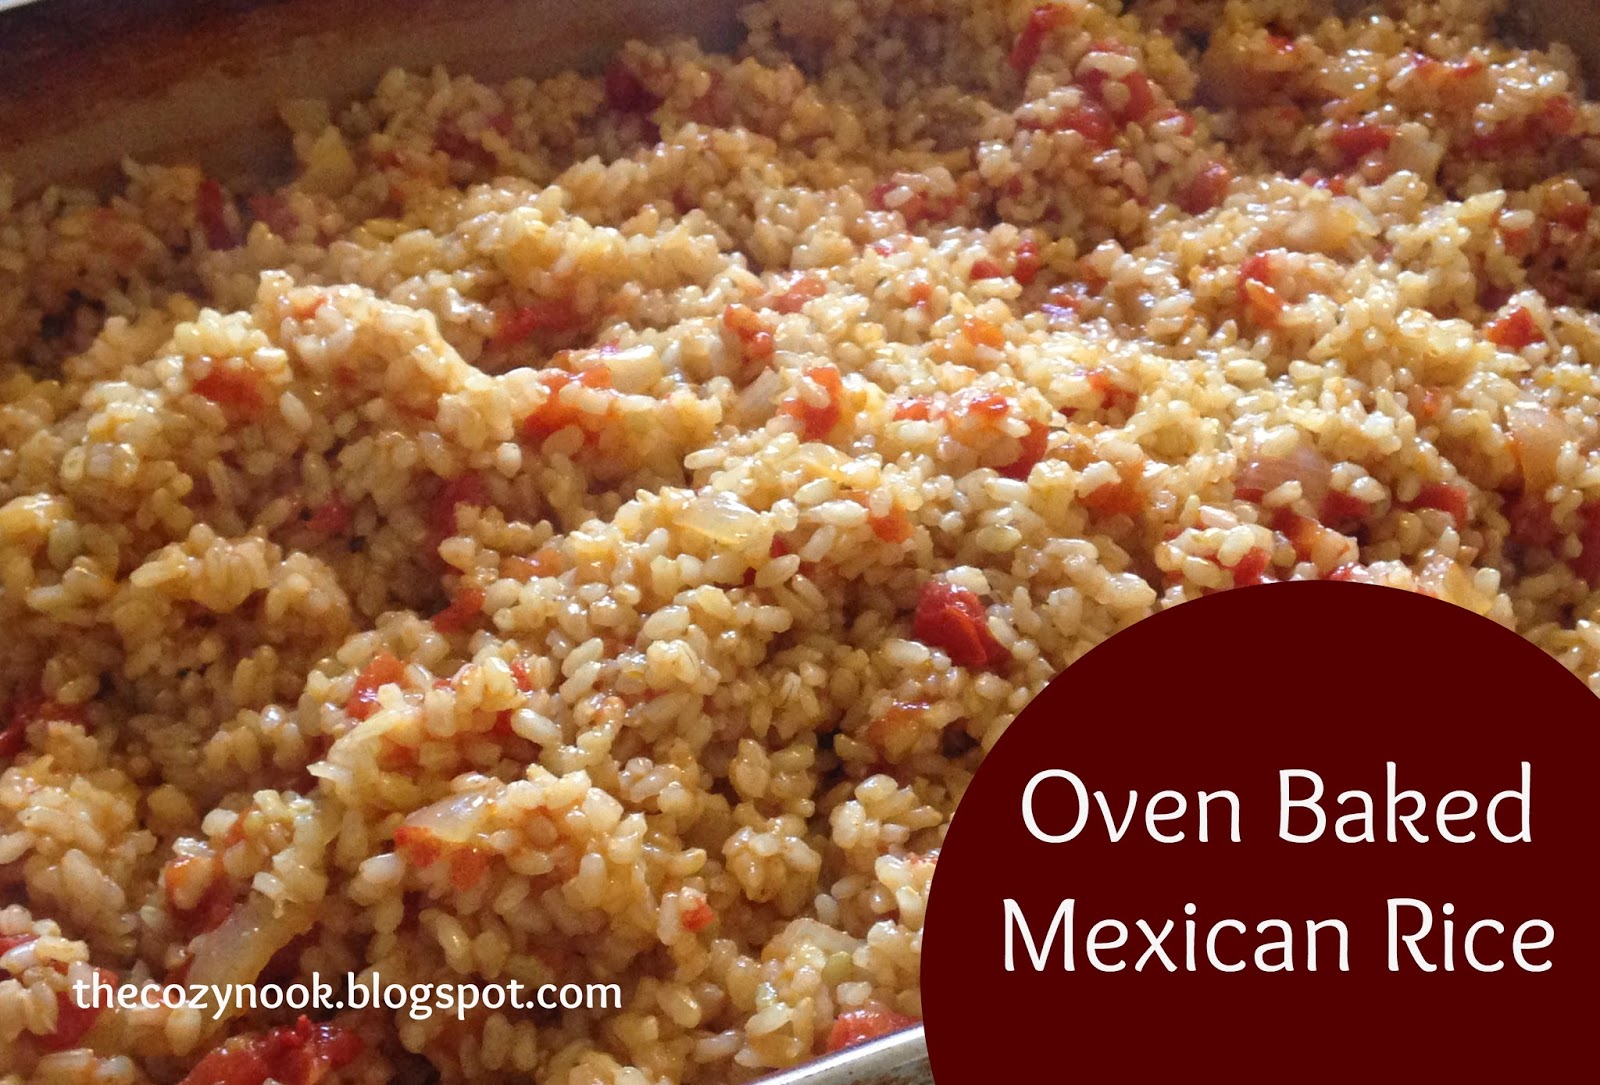 The Cozy Nook: Oven Baked Mexican Rice